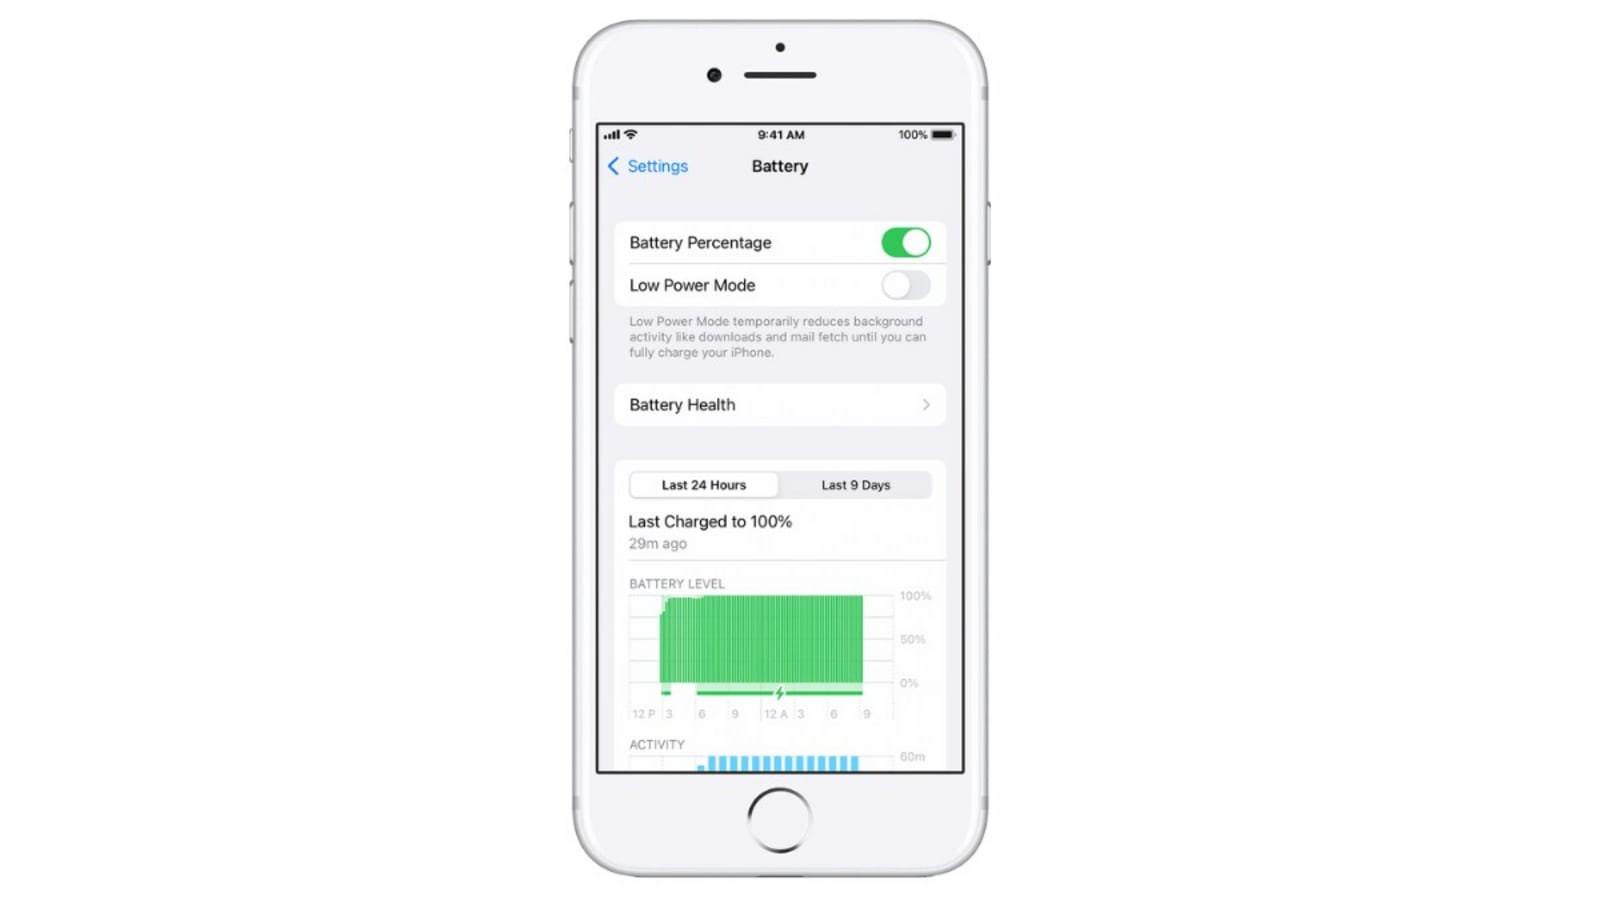 iPhone Battery Health: What You Need to Know